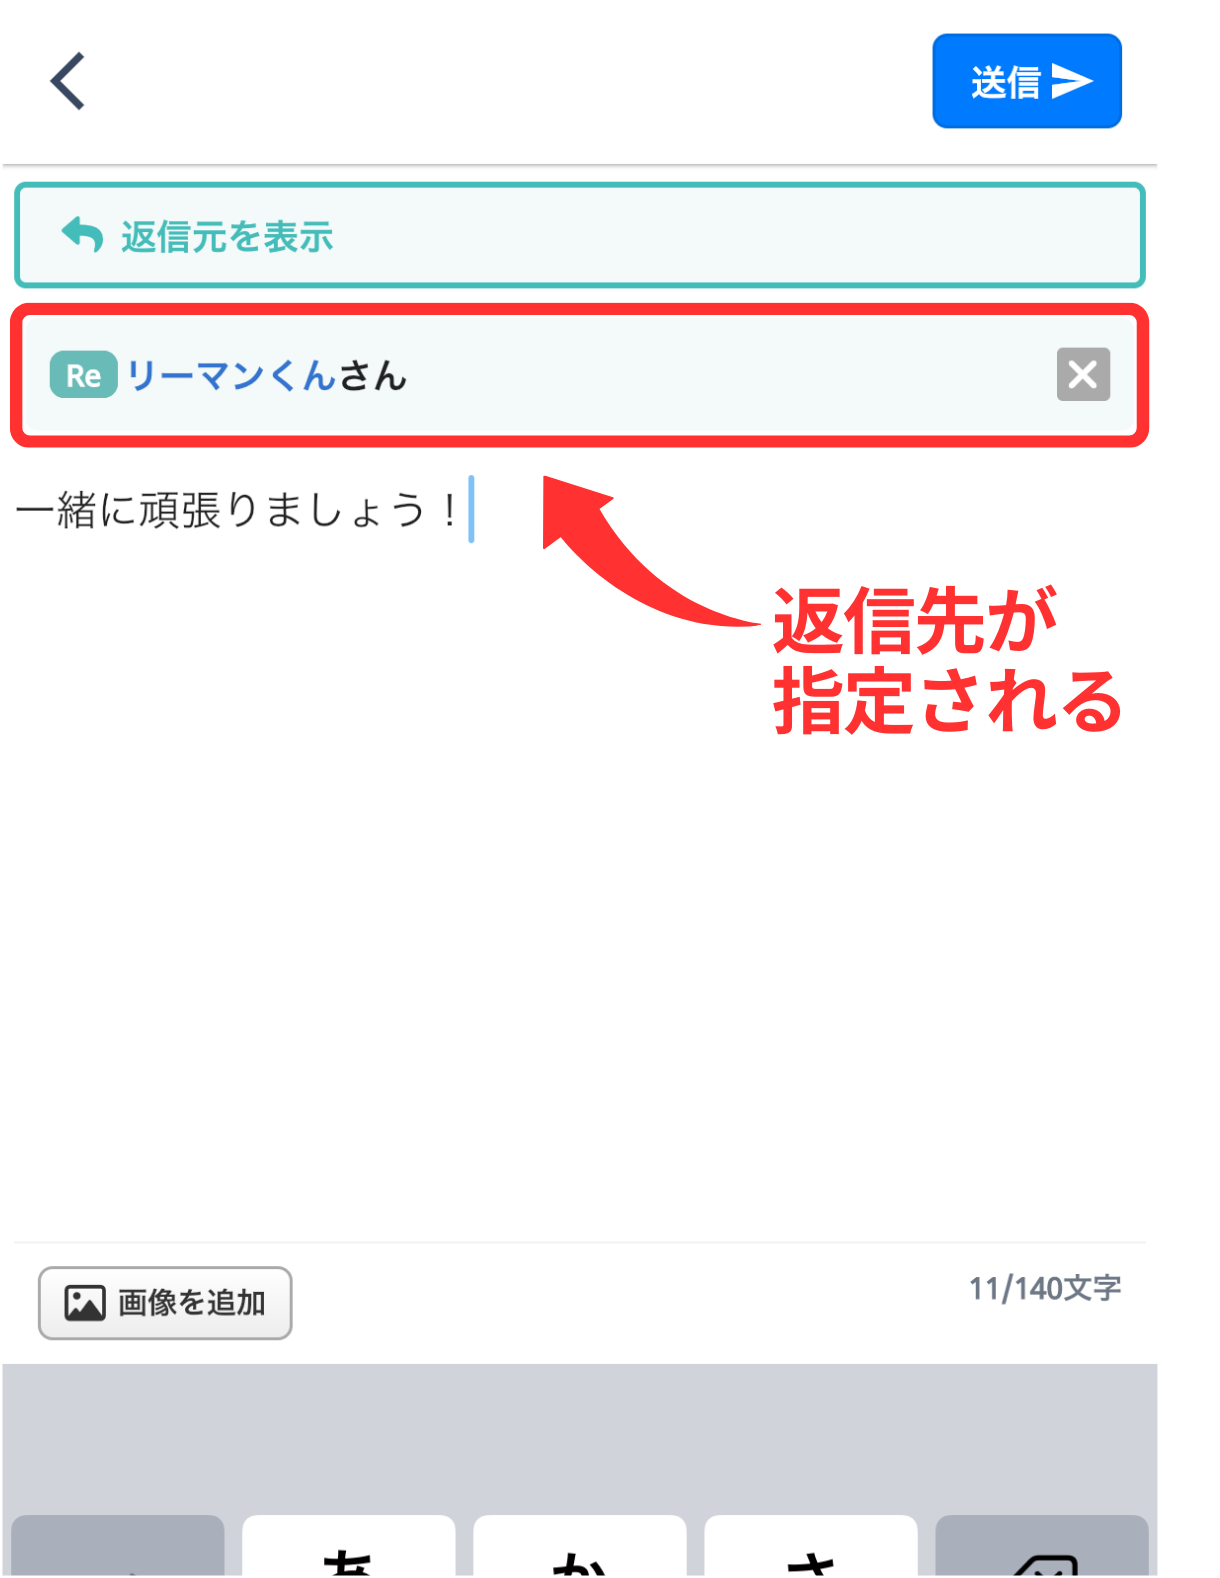 LC_App_つぶやき返信2_CANVA.png